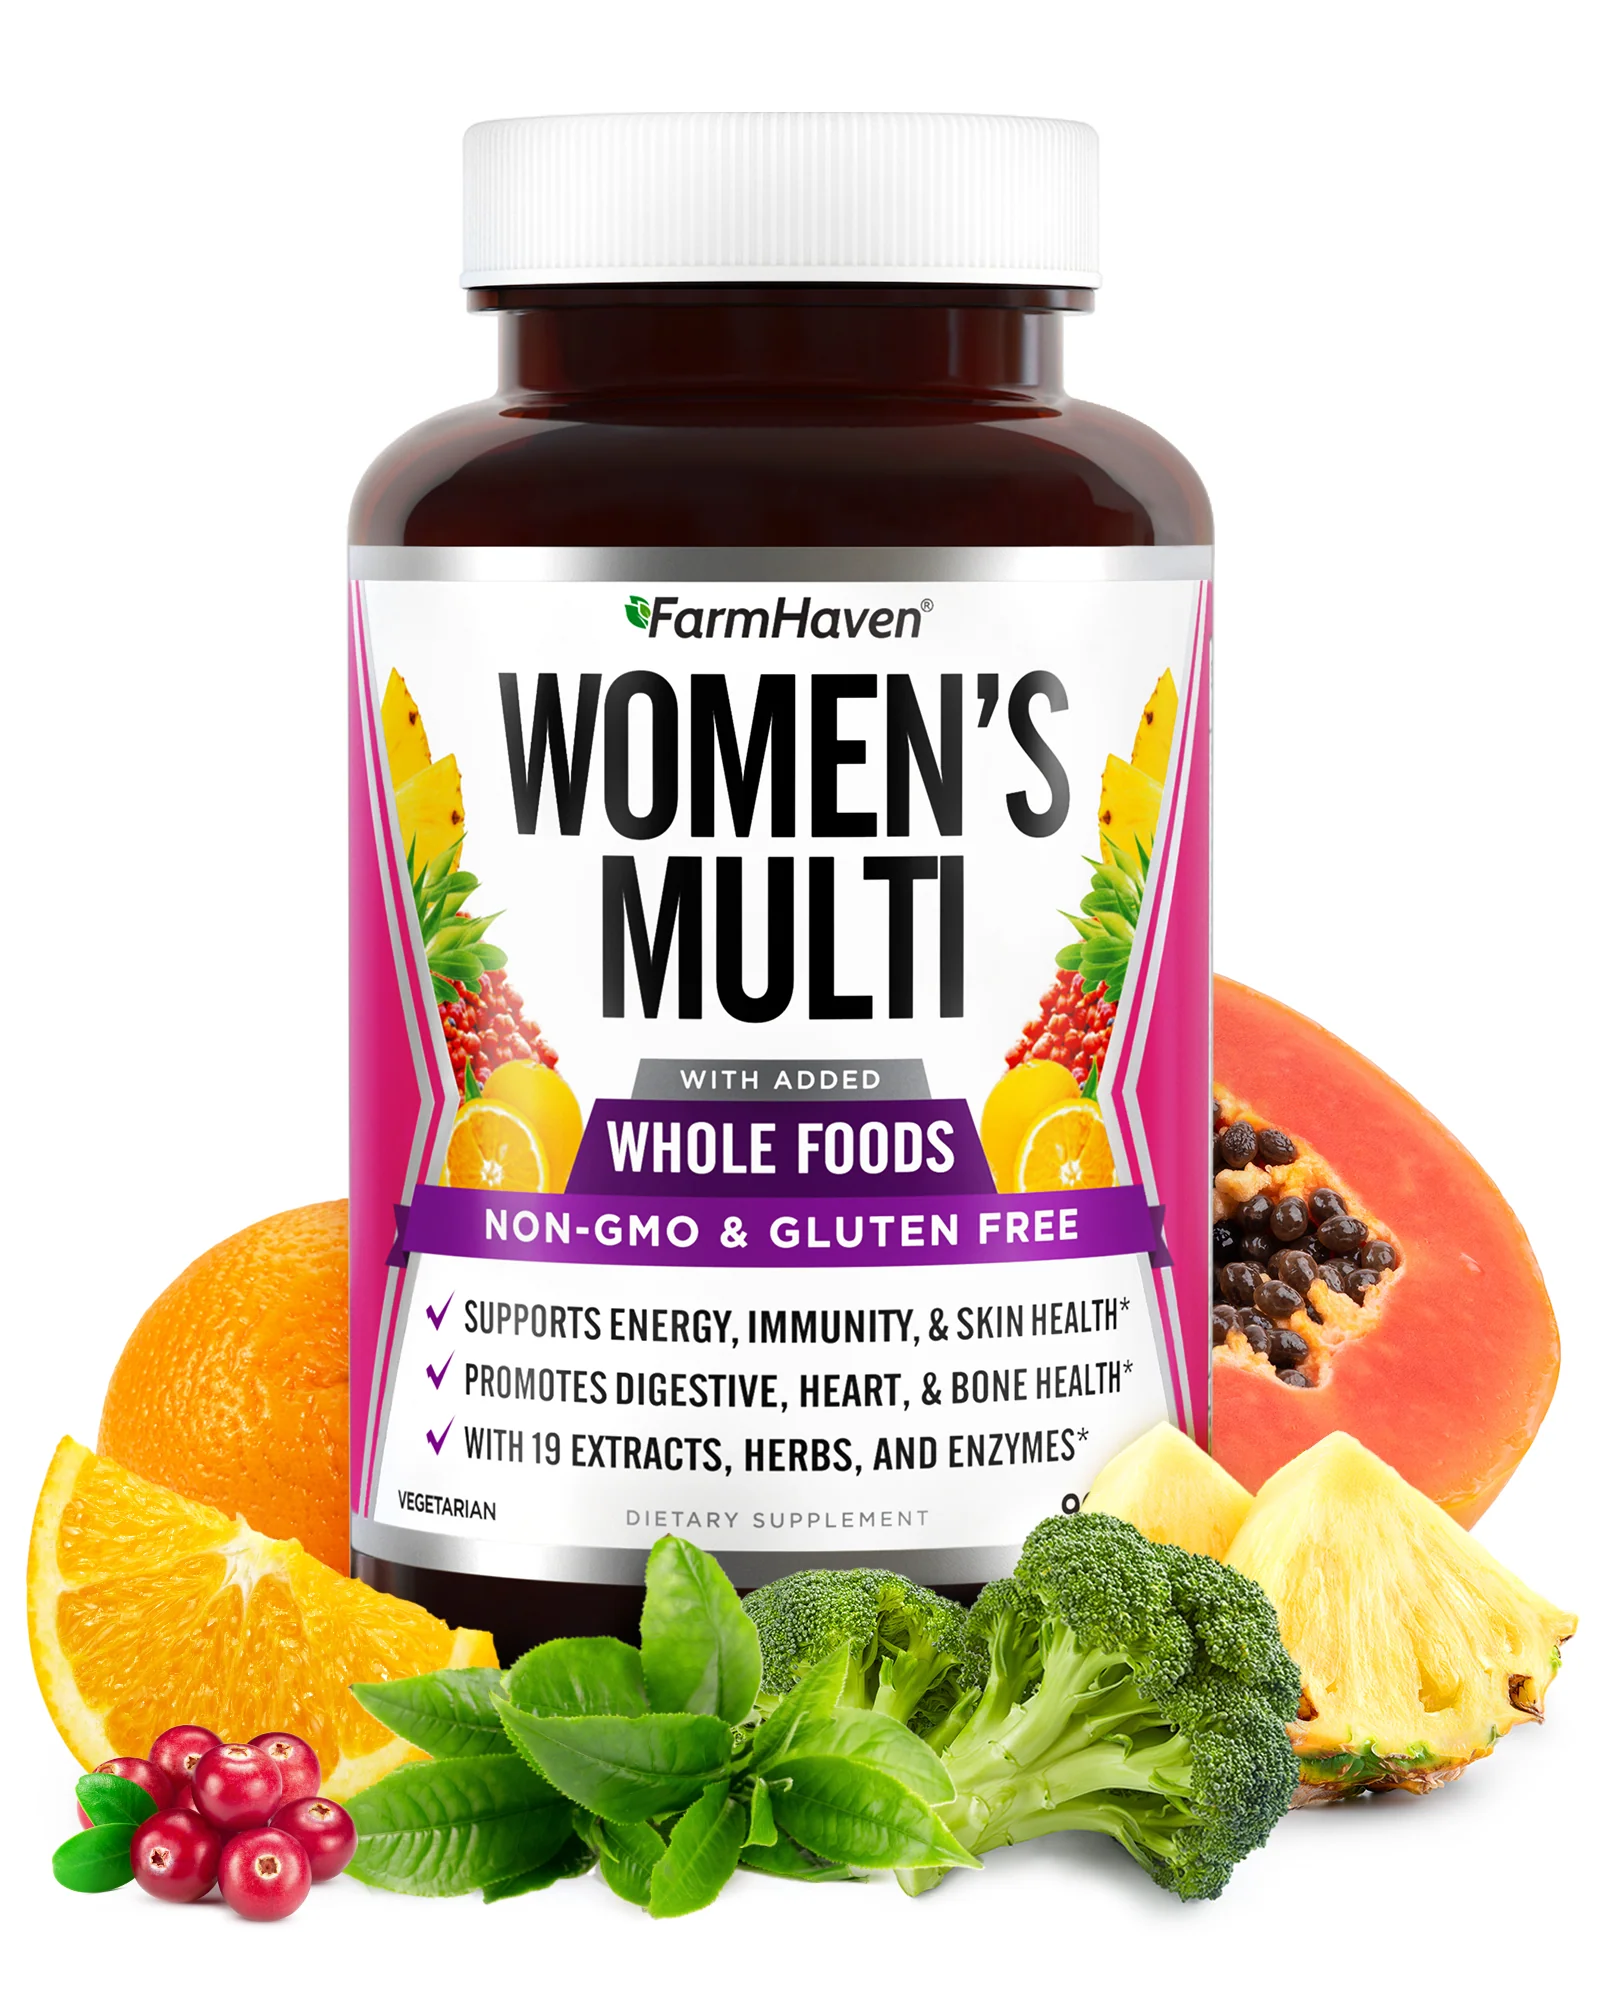 5 Best Multivitamin For Women And Their Benefits